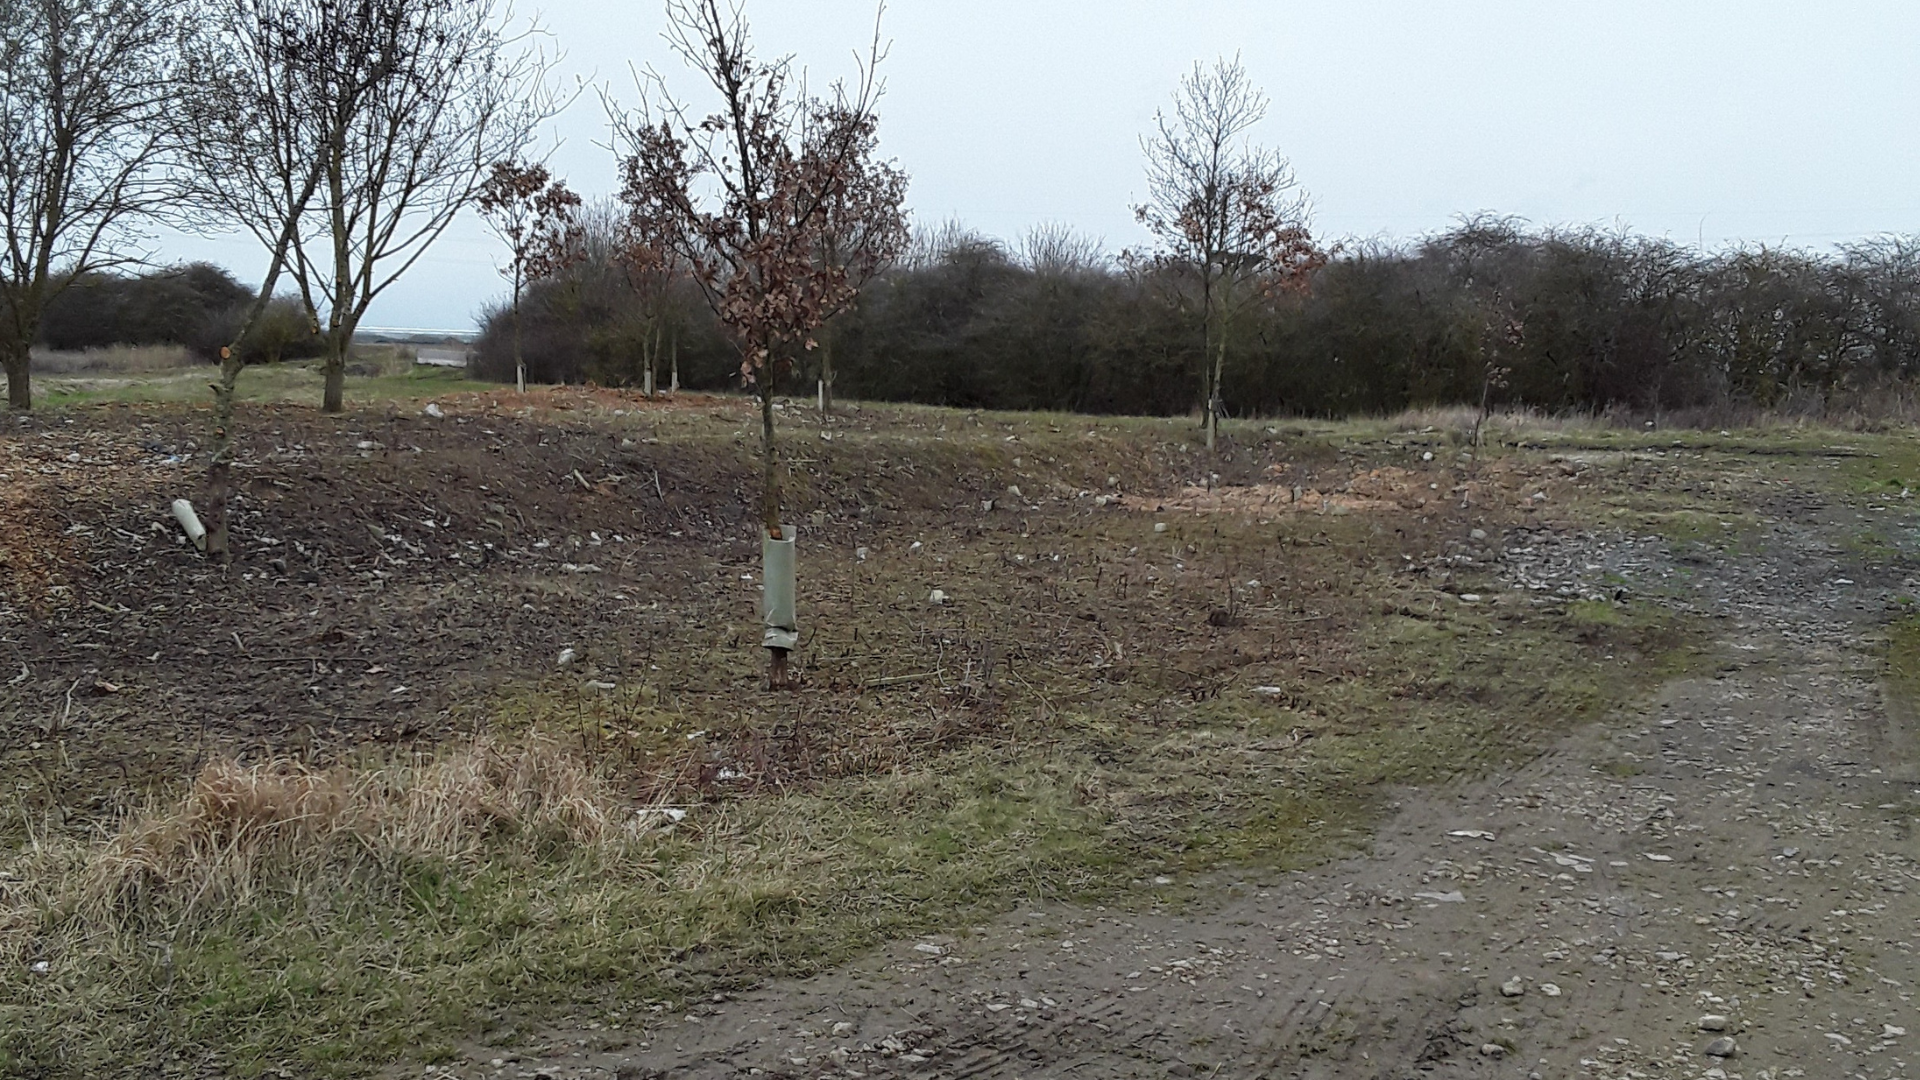 An empty area with new trees planted